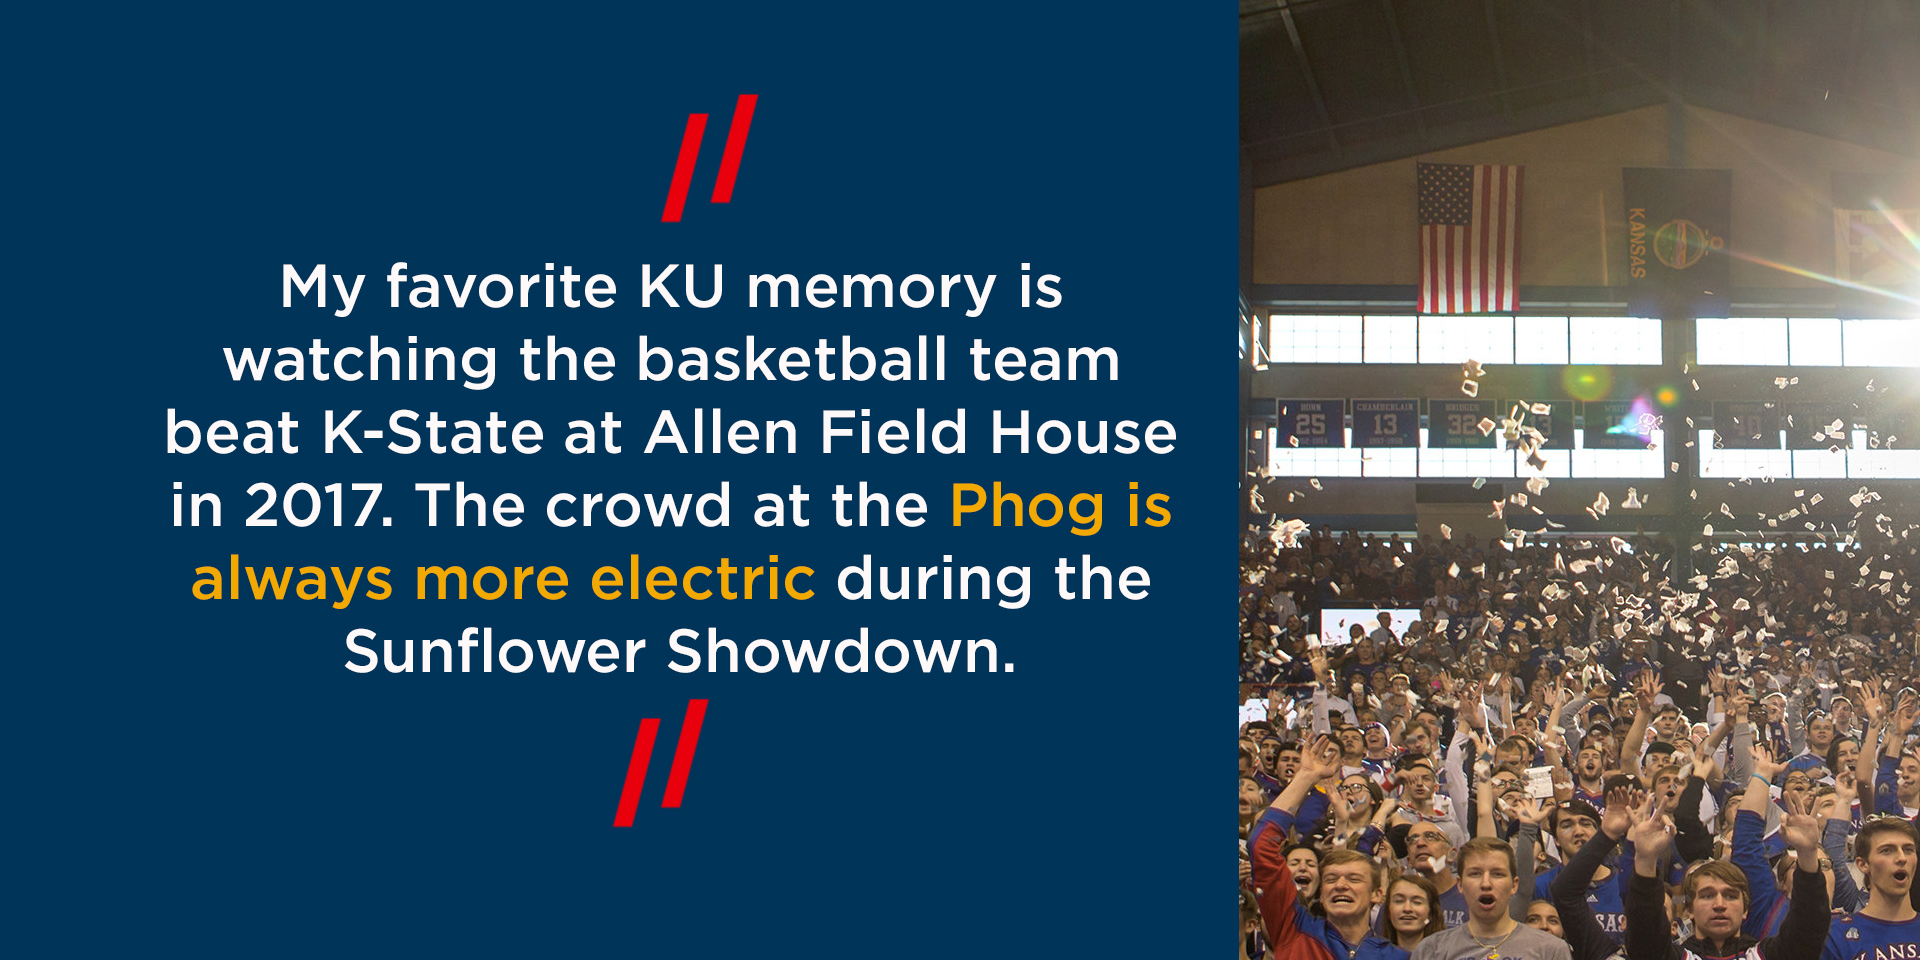 My favorite KU memory is watching the basketball team beat K-State at Allen Field House in 2017. The crowd at the Phog is always more electric during the Sunflower Showdown.